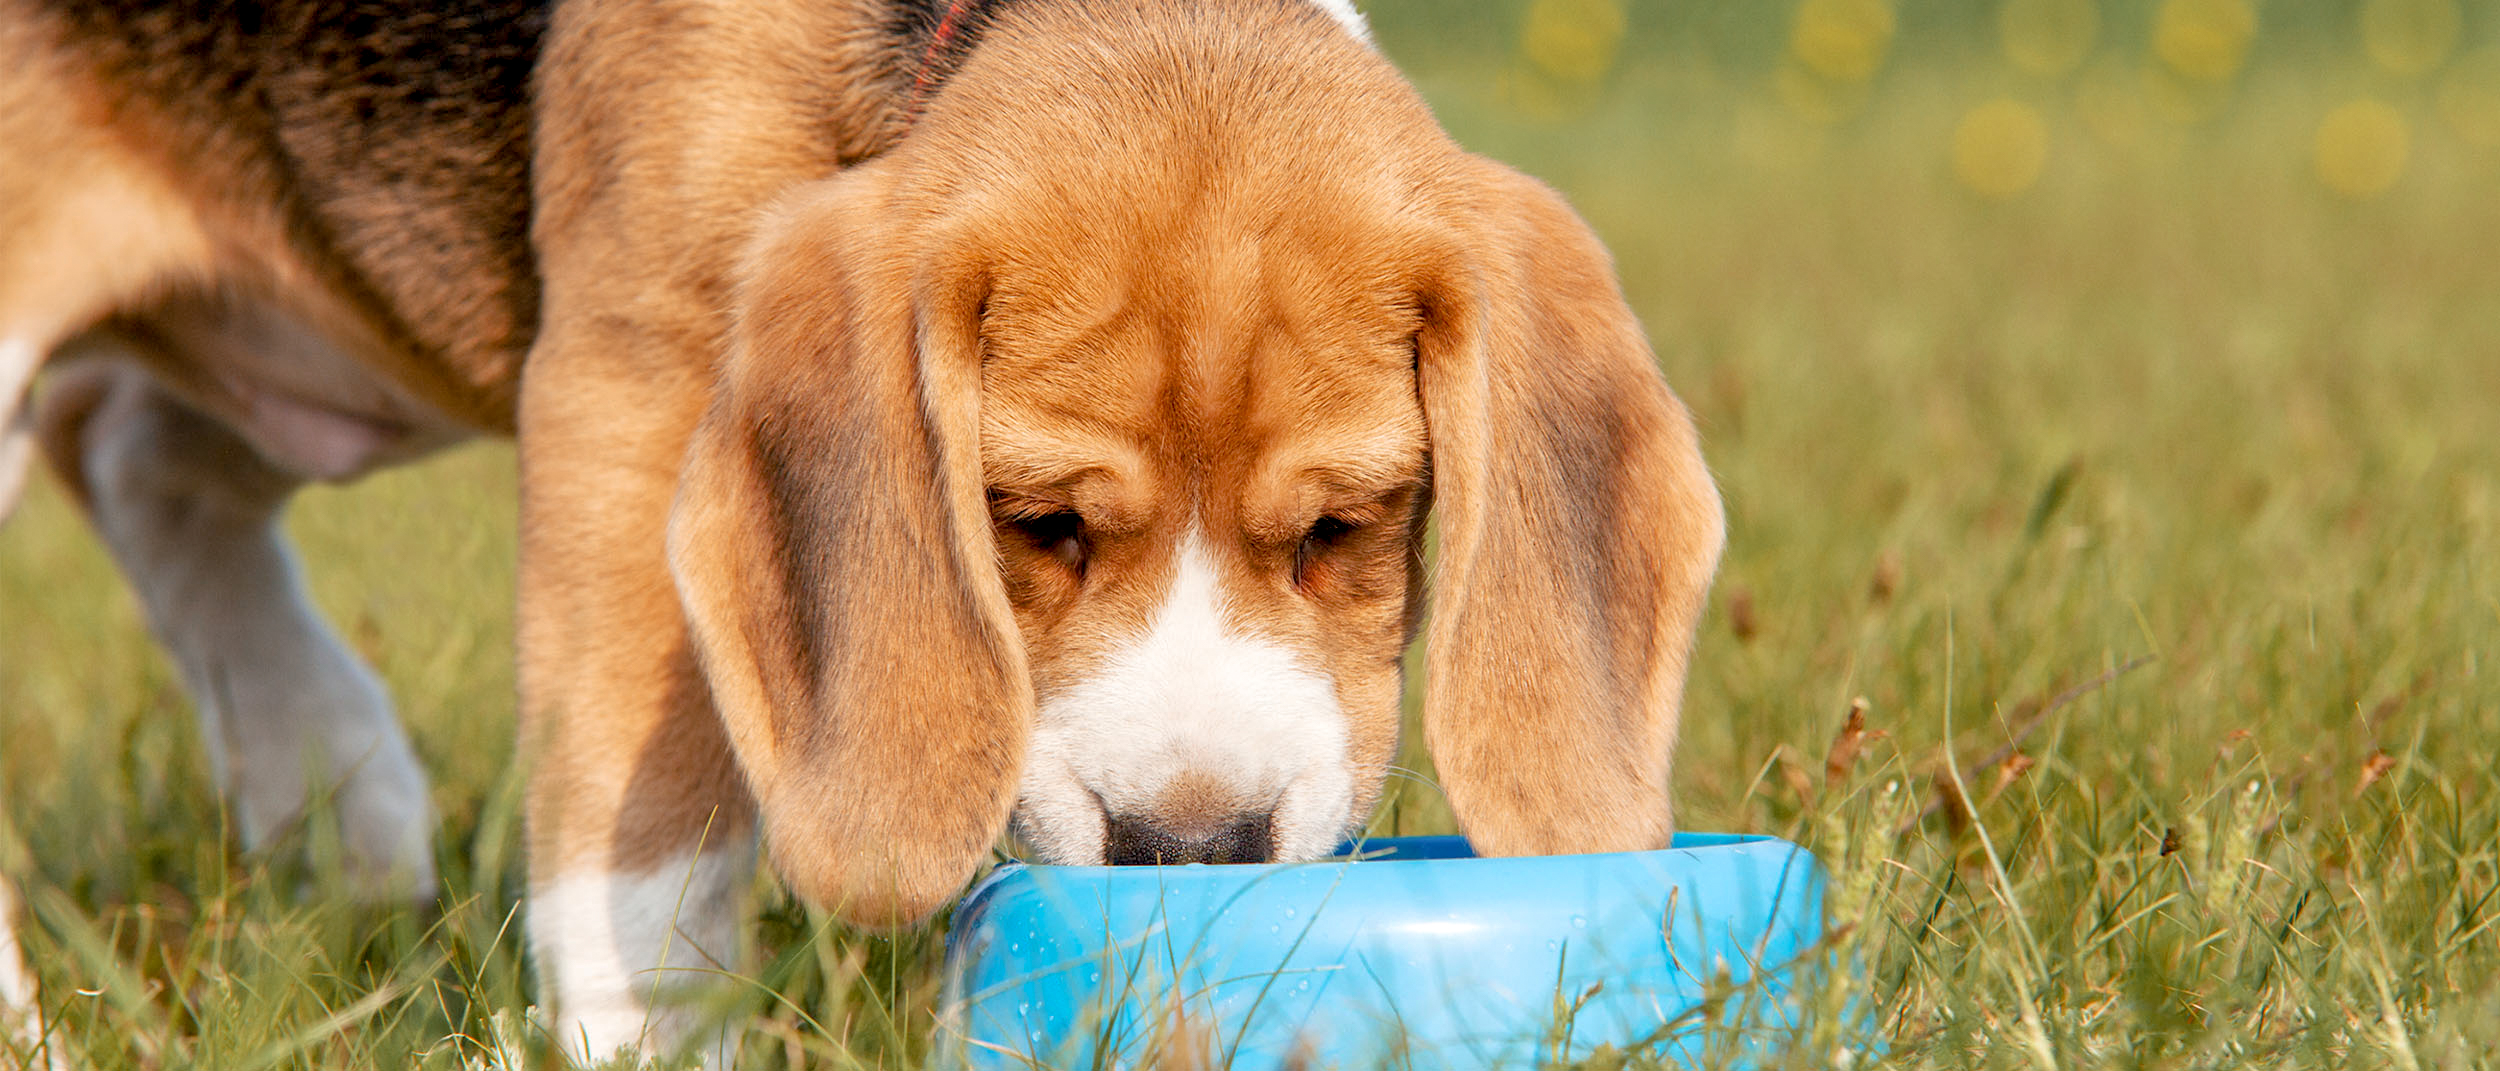 Puppy Beagle standing outside eating from a blue bowl.